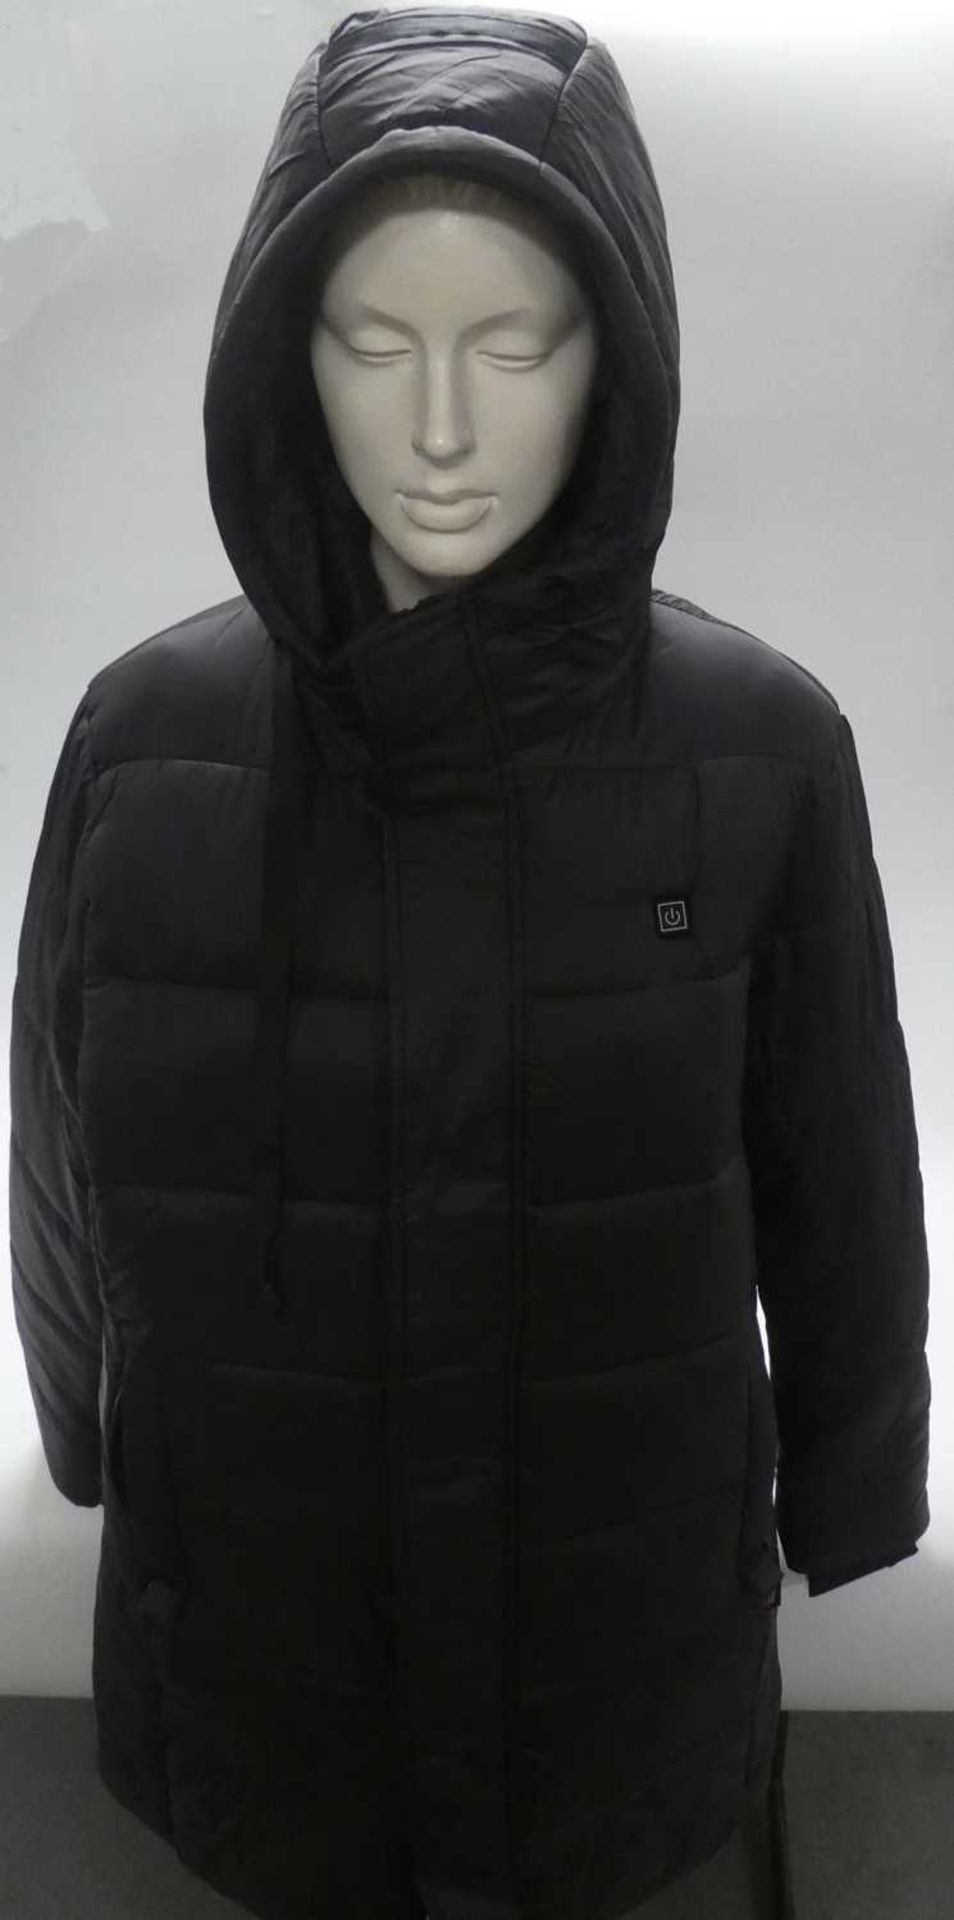 +VAT Thermofusion heated parka with 5000mAh battery pack size small